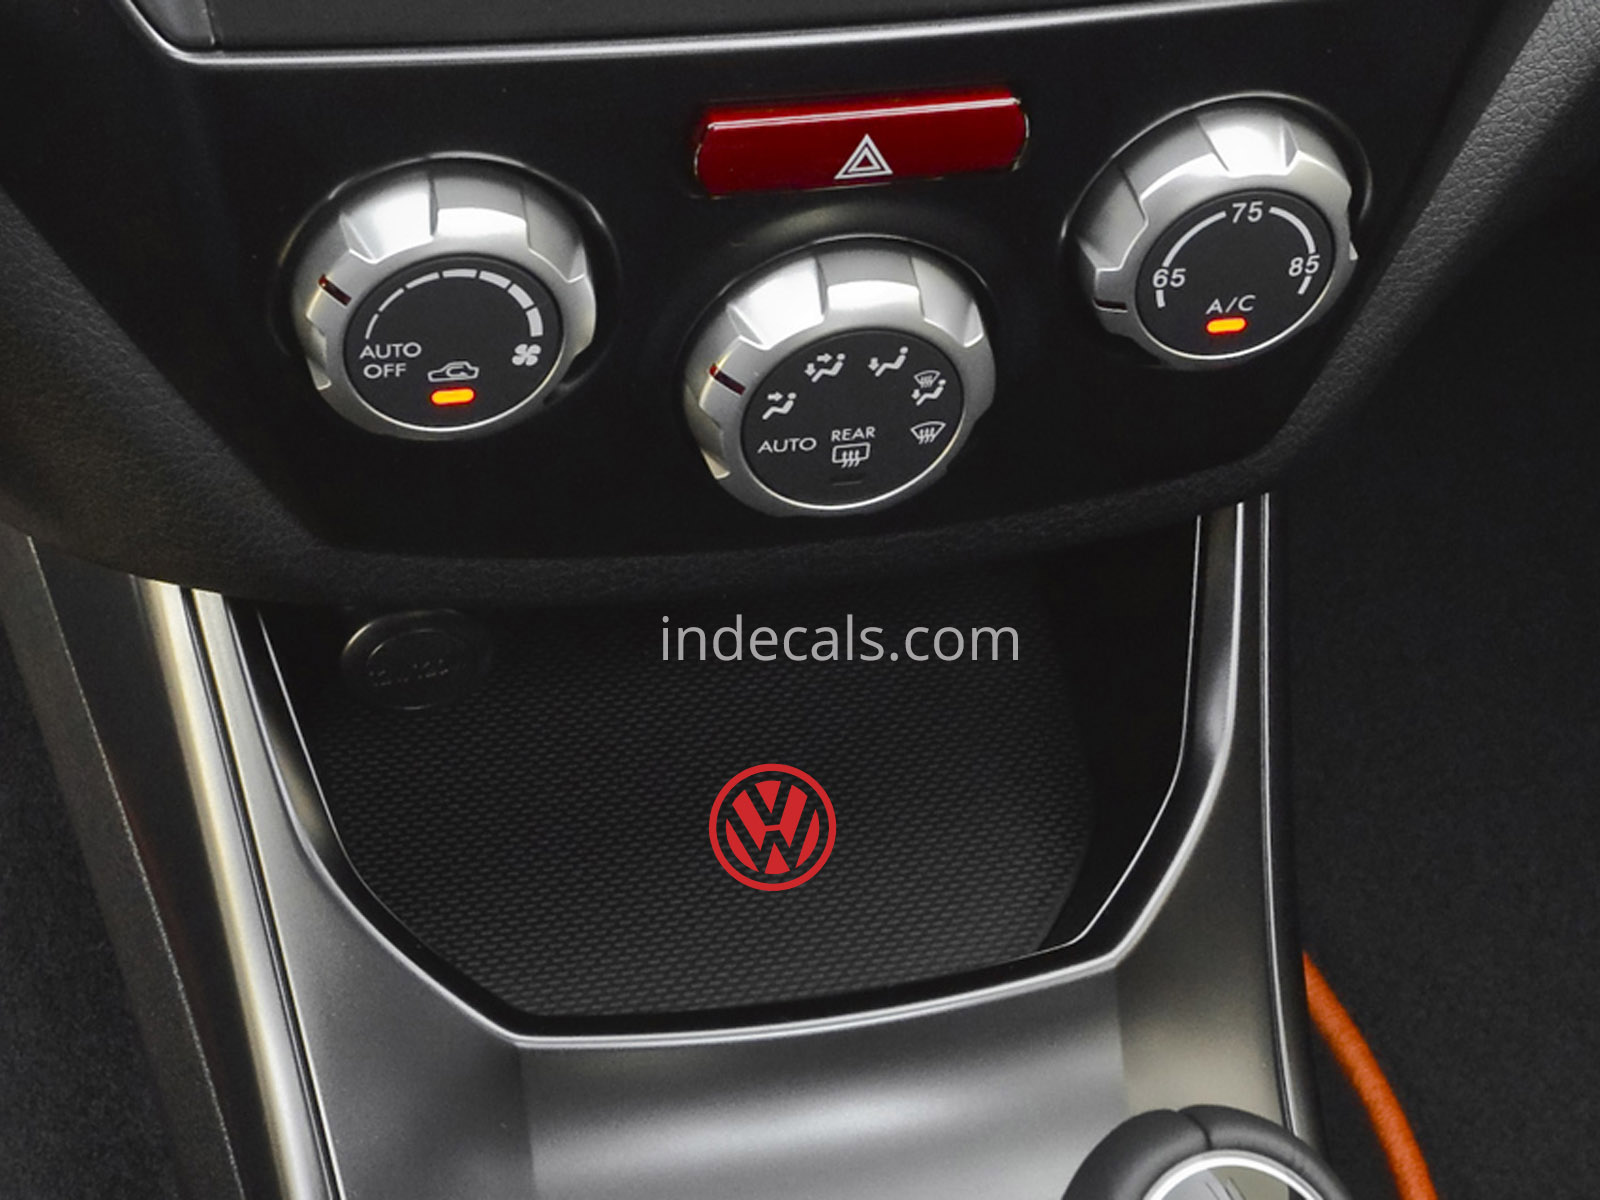 3 x Volkswagen Stickers for Ashtray - Red